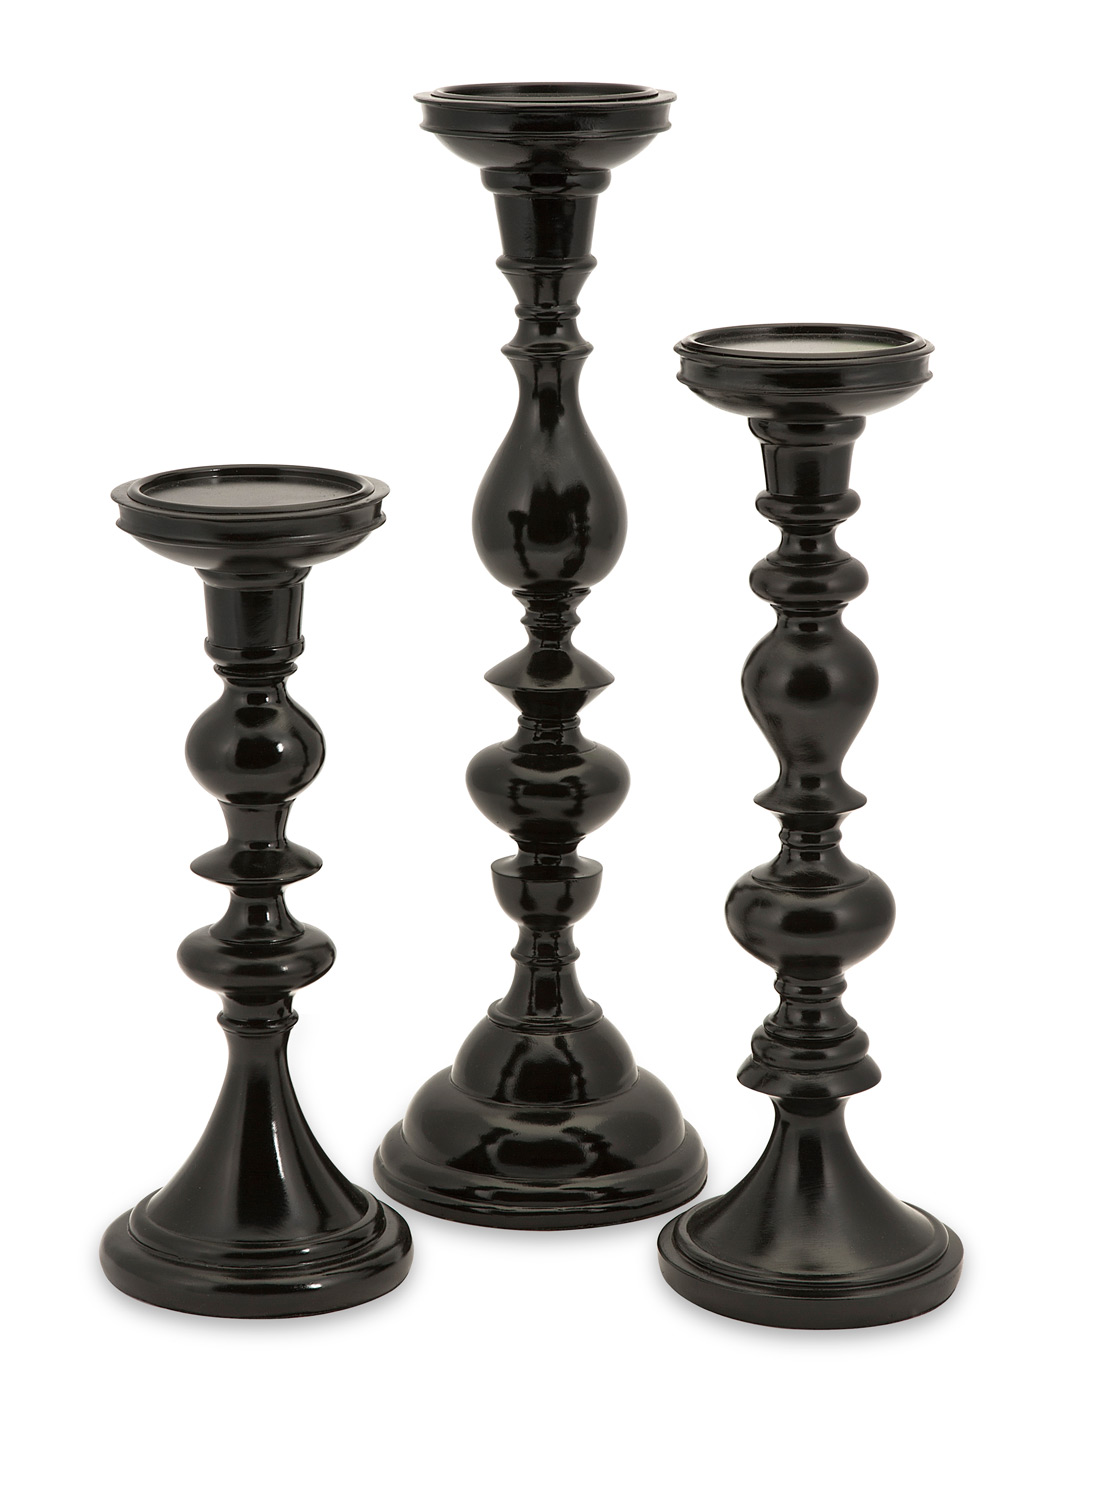 IMAX Essential Black Candle Holders - Set of 3